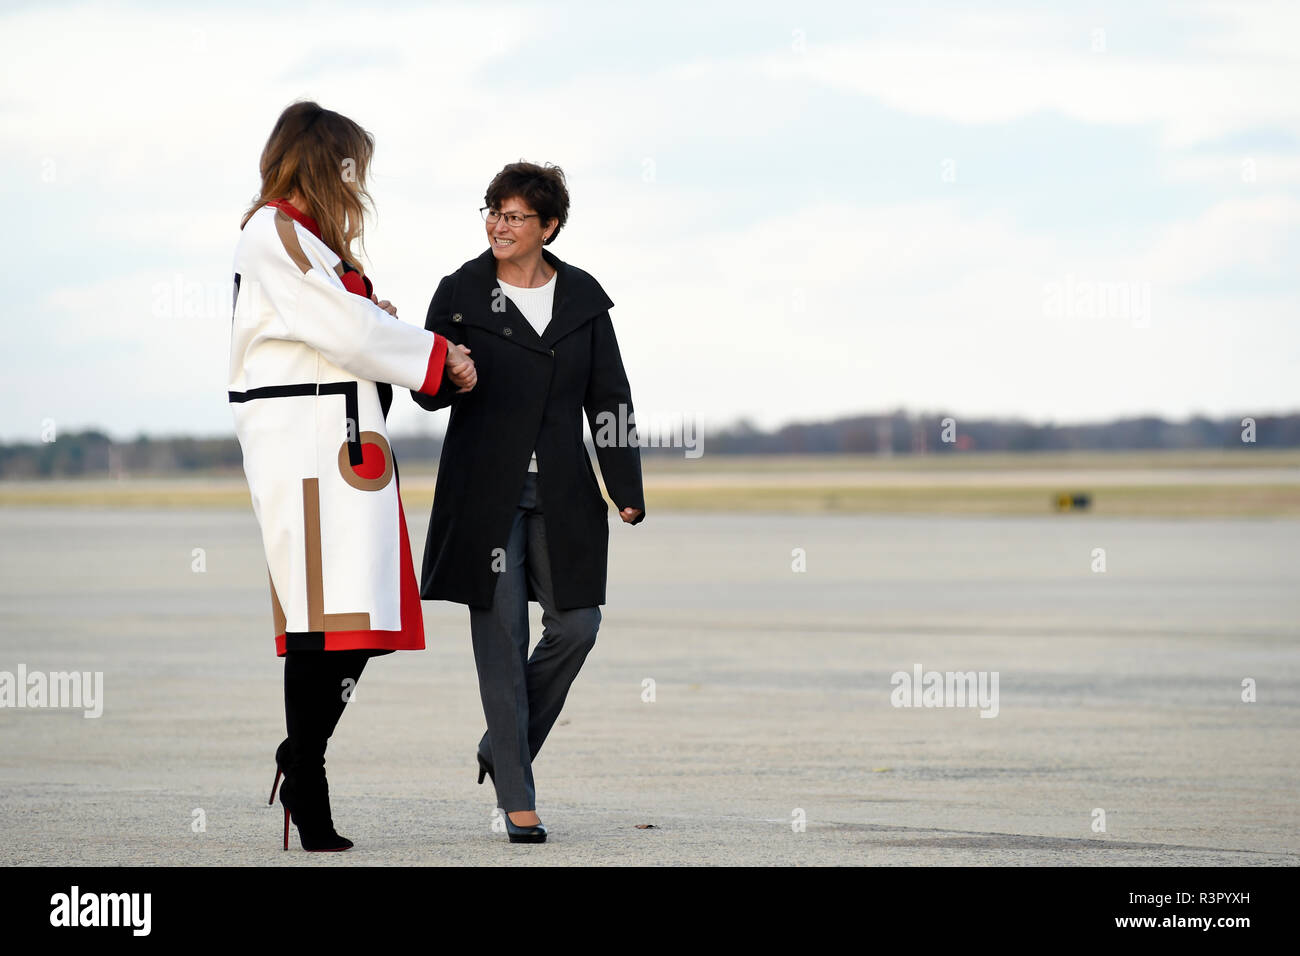 First Lady of the United States Melania Trump, (left) shakes hands with Kathy Helms, wife of Col. Rebecca Sonkiss, 89th Airlift Wing commander as Helms escorts the First Lady to Air Force One, Nov. 20, 2018 Joint Base Andrews, Md. (U.S. Air Force photo/Staff Sgt. Kenny Holston) Stock Photo